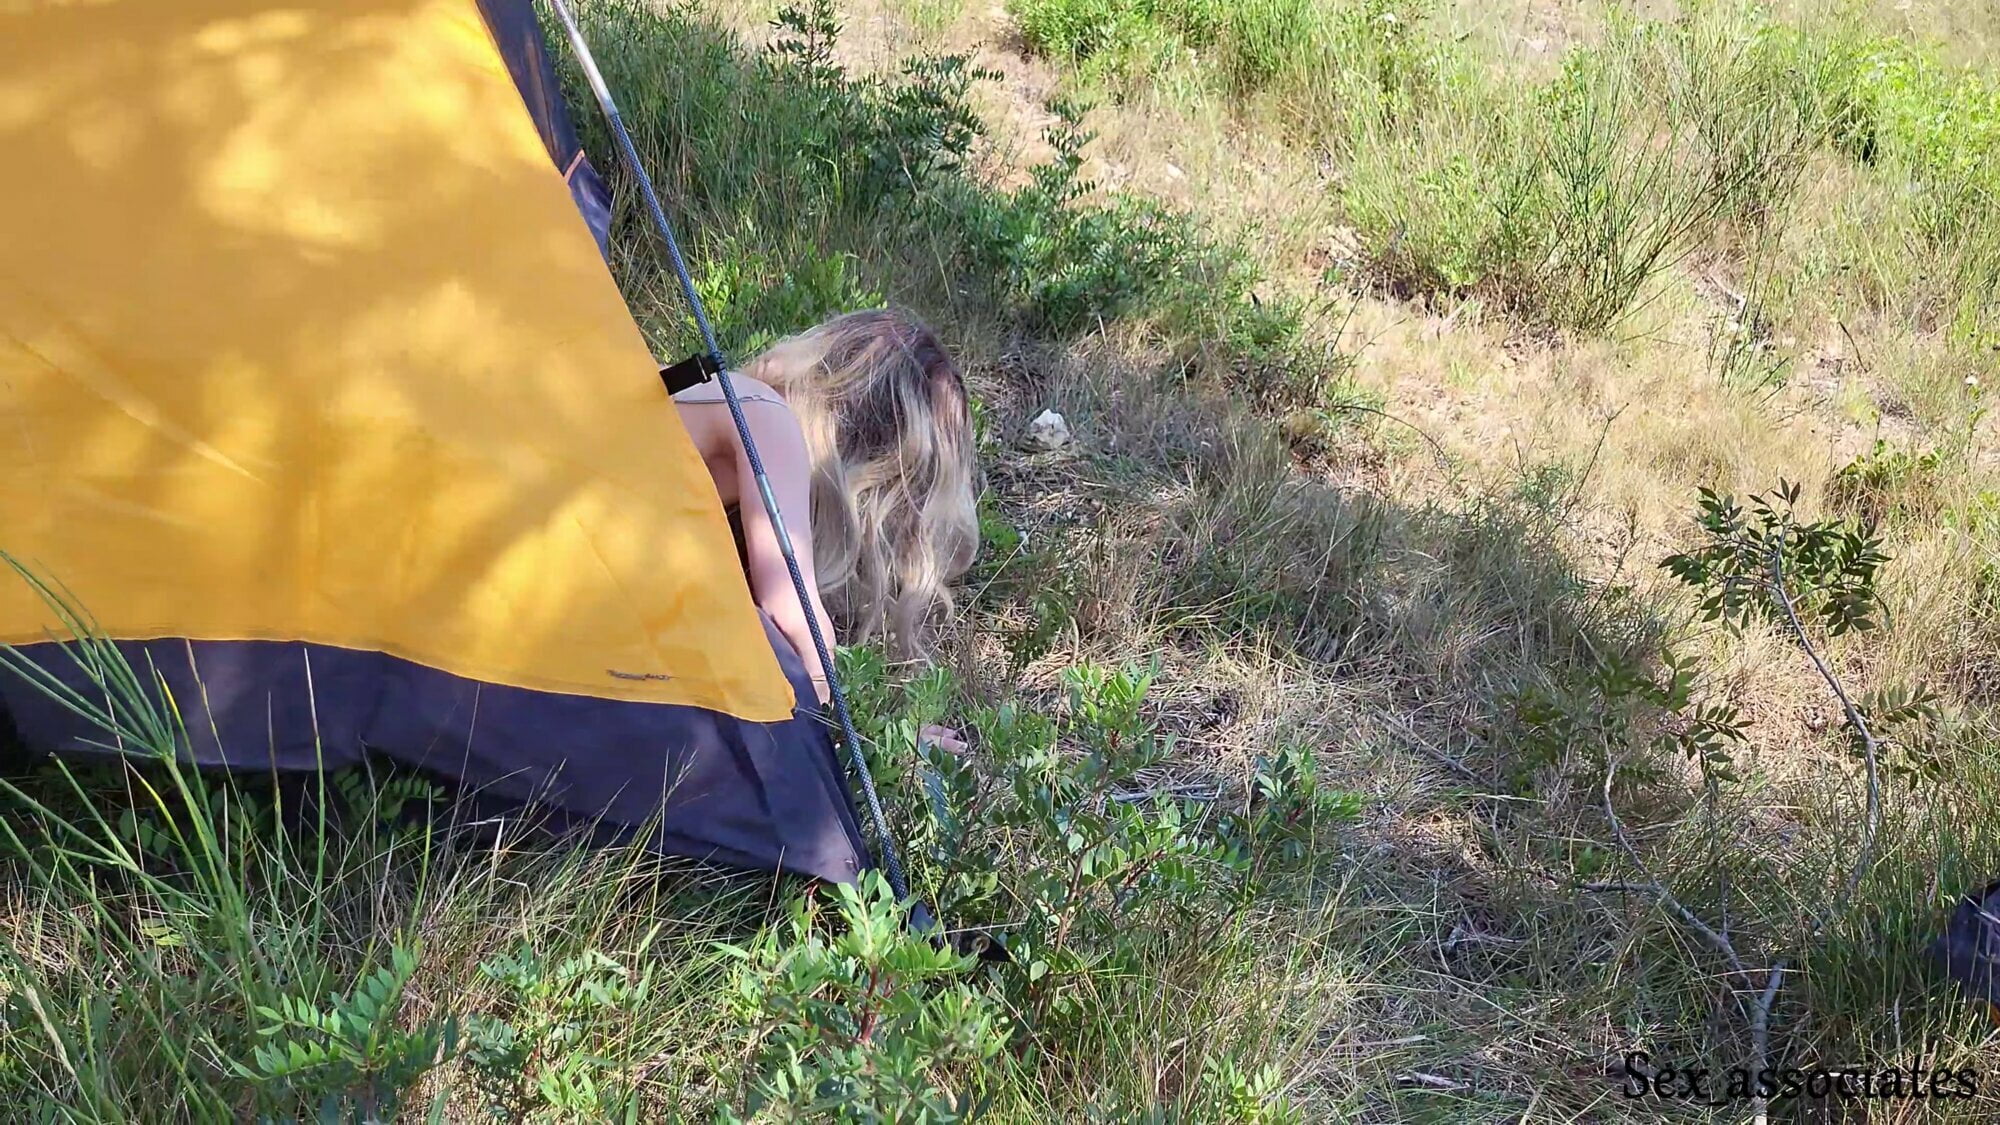 The tourist heard loud moaning and caught couple fucking in the tent. 